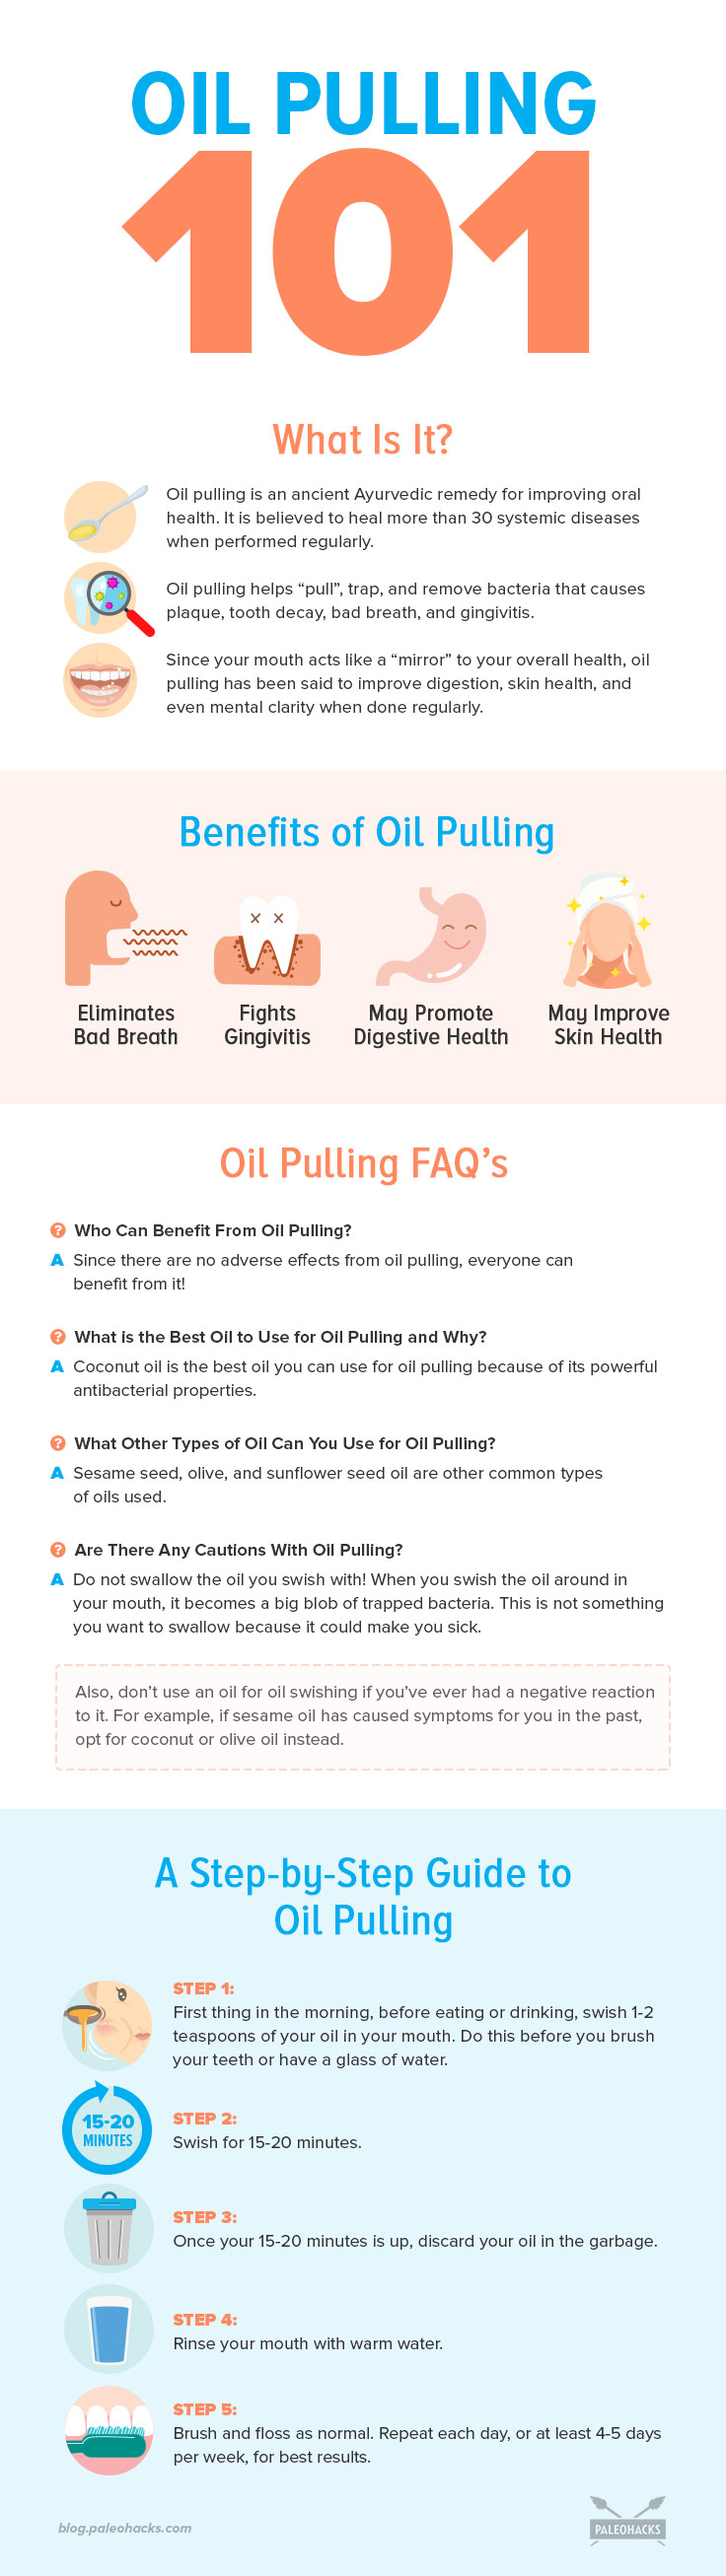 Could swishing oil around in your mouth be the secret to whiter teeth, fewer cavities, and fresher breath? Who can benefit from oil pulling?